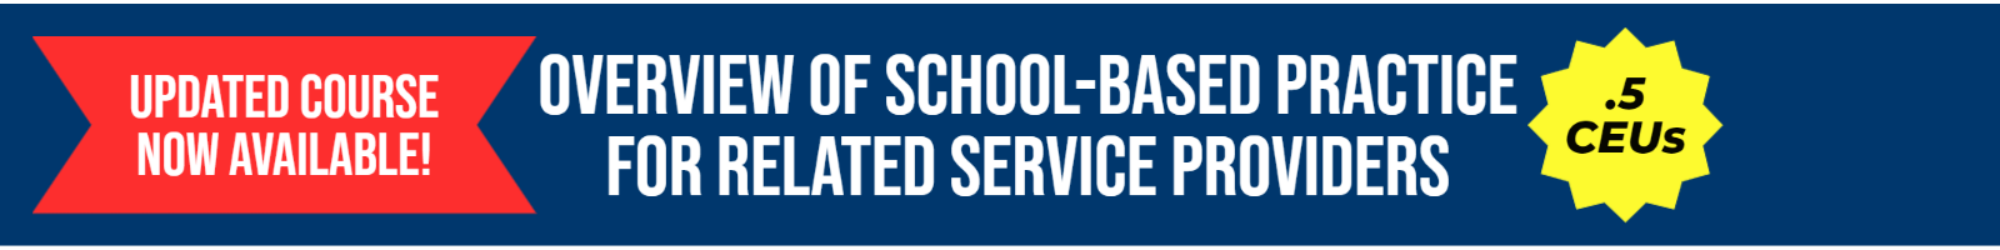 Overview of School-Based Practice for Related Service Providers Updated Course Now Available .5 CEUs